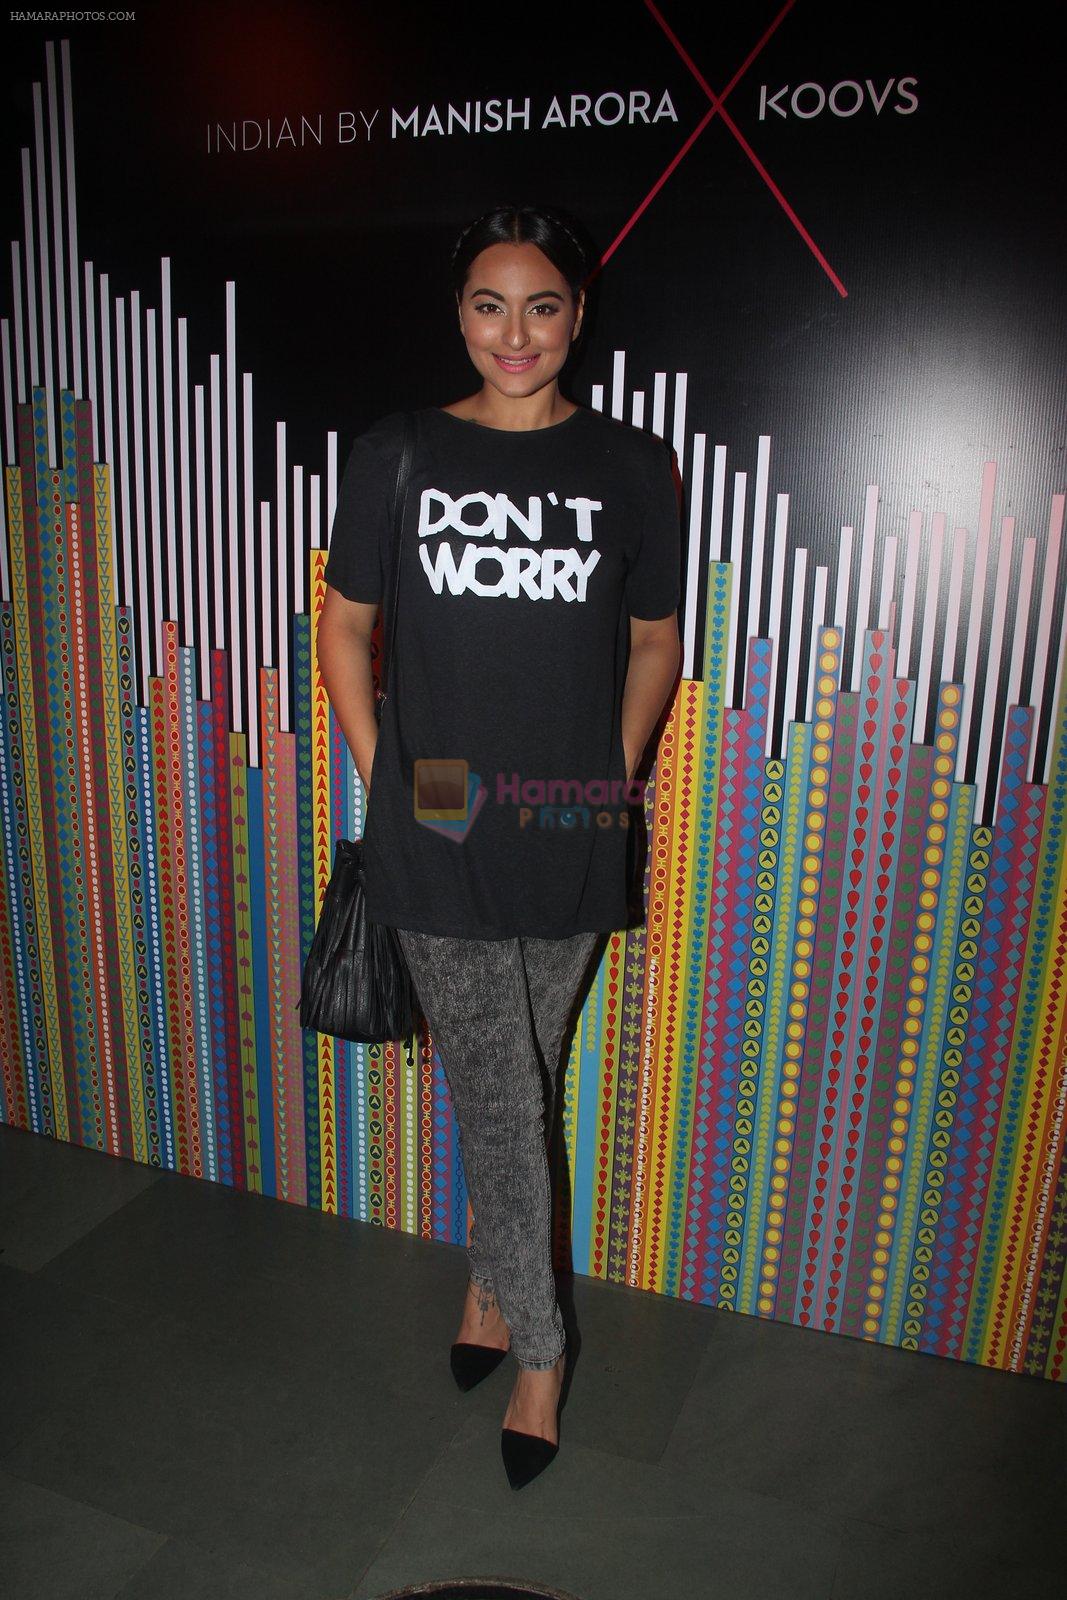 Sonakshi Sinha at Indian by Manish Arora for Koovs.com on 1st April 2016